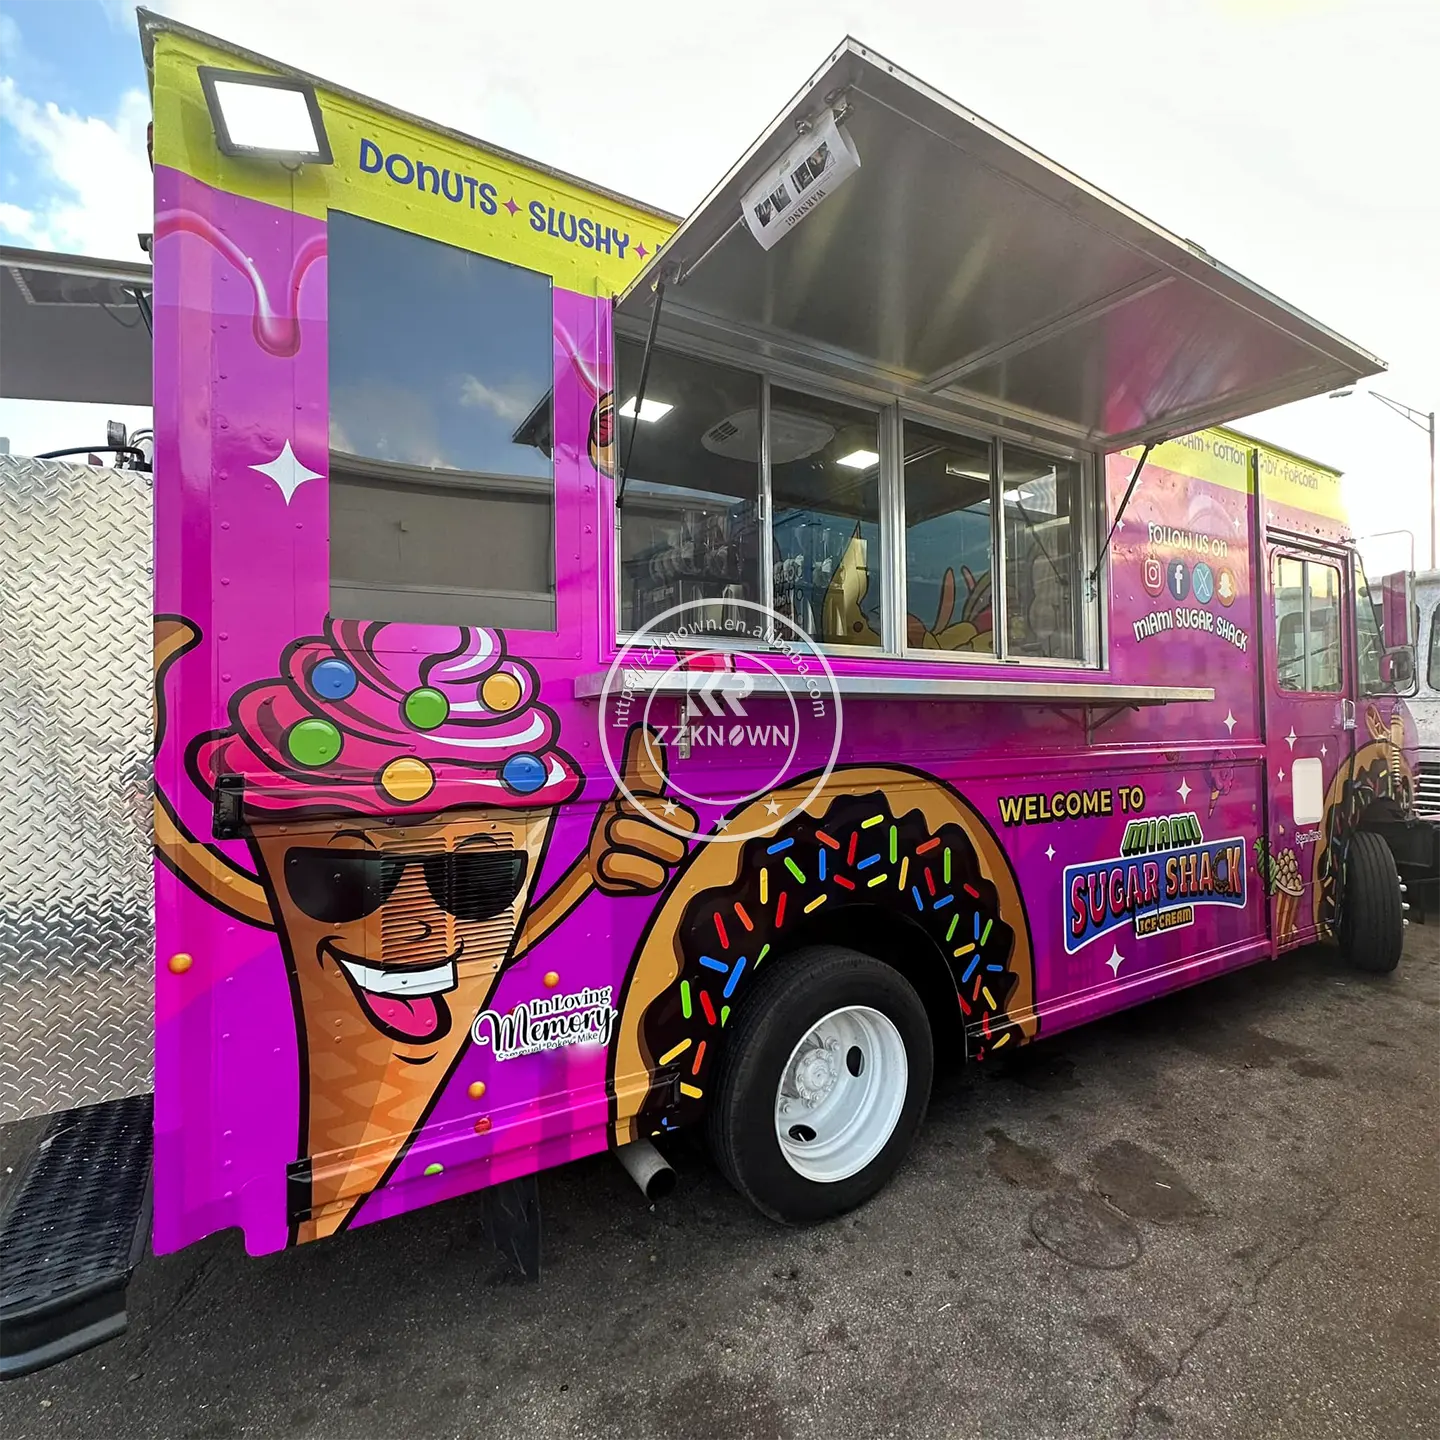 Party Food Truck Ice Cream Truck Equipment Pizza Coffee Trailer Catering Trailer Ice Cream Vintage Food Truck For Sale Food Cart